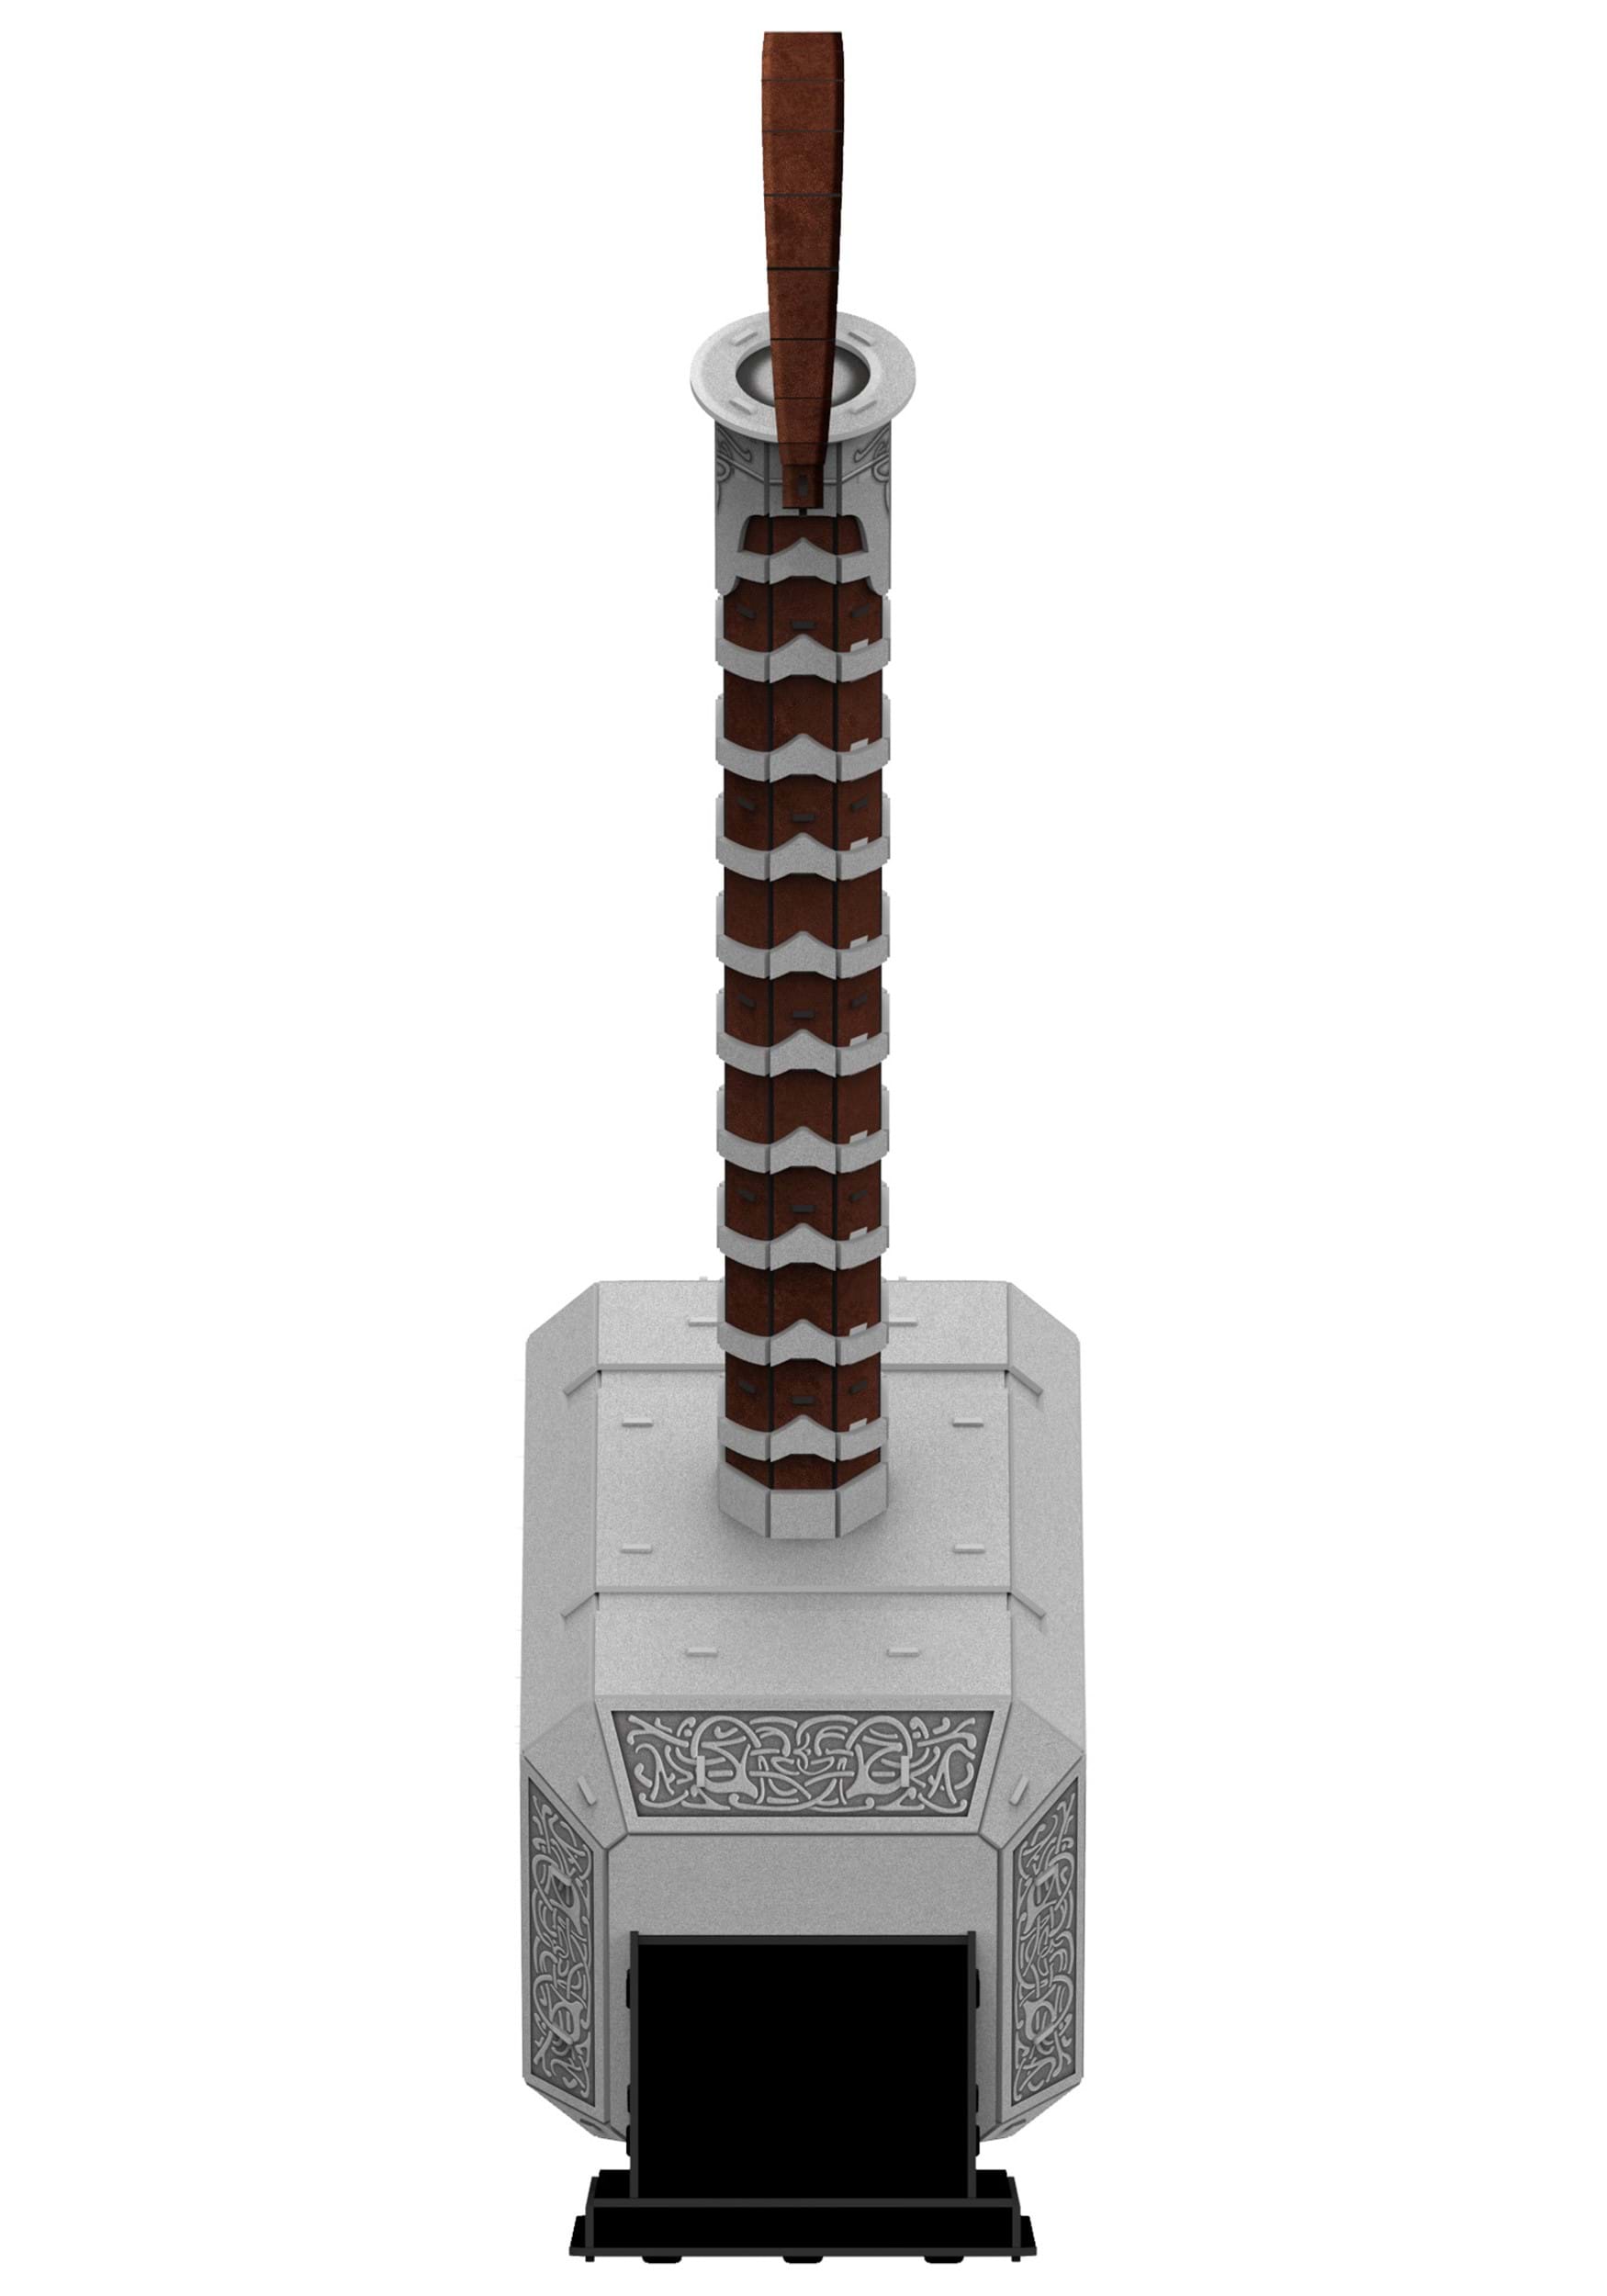 Thor Hammer Marvel 3D Puzzle